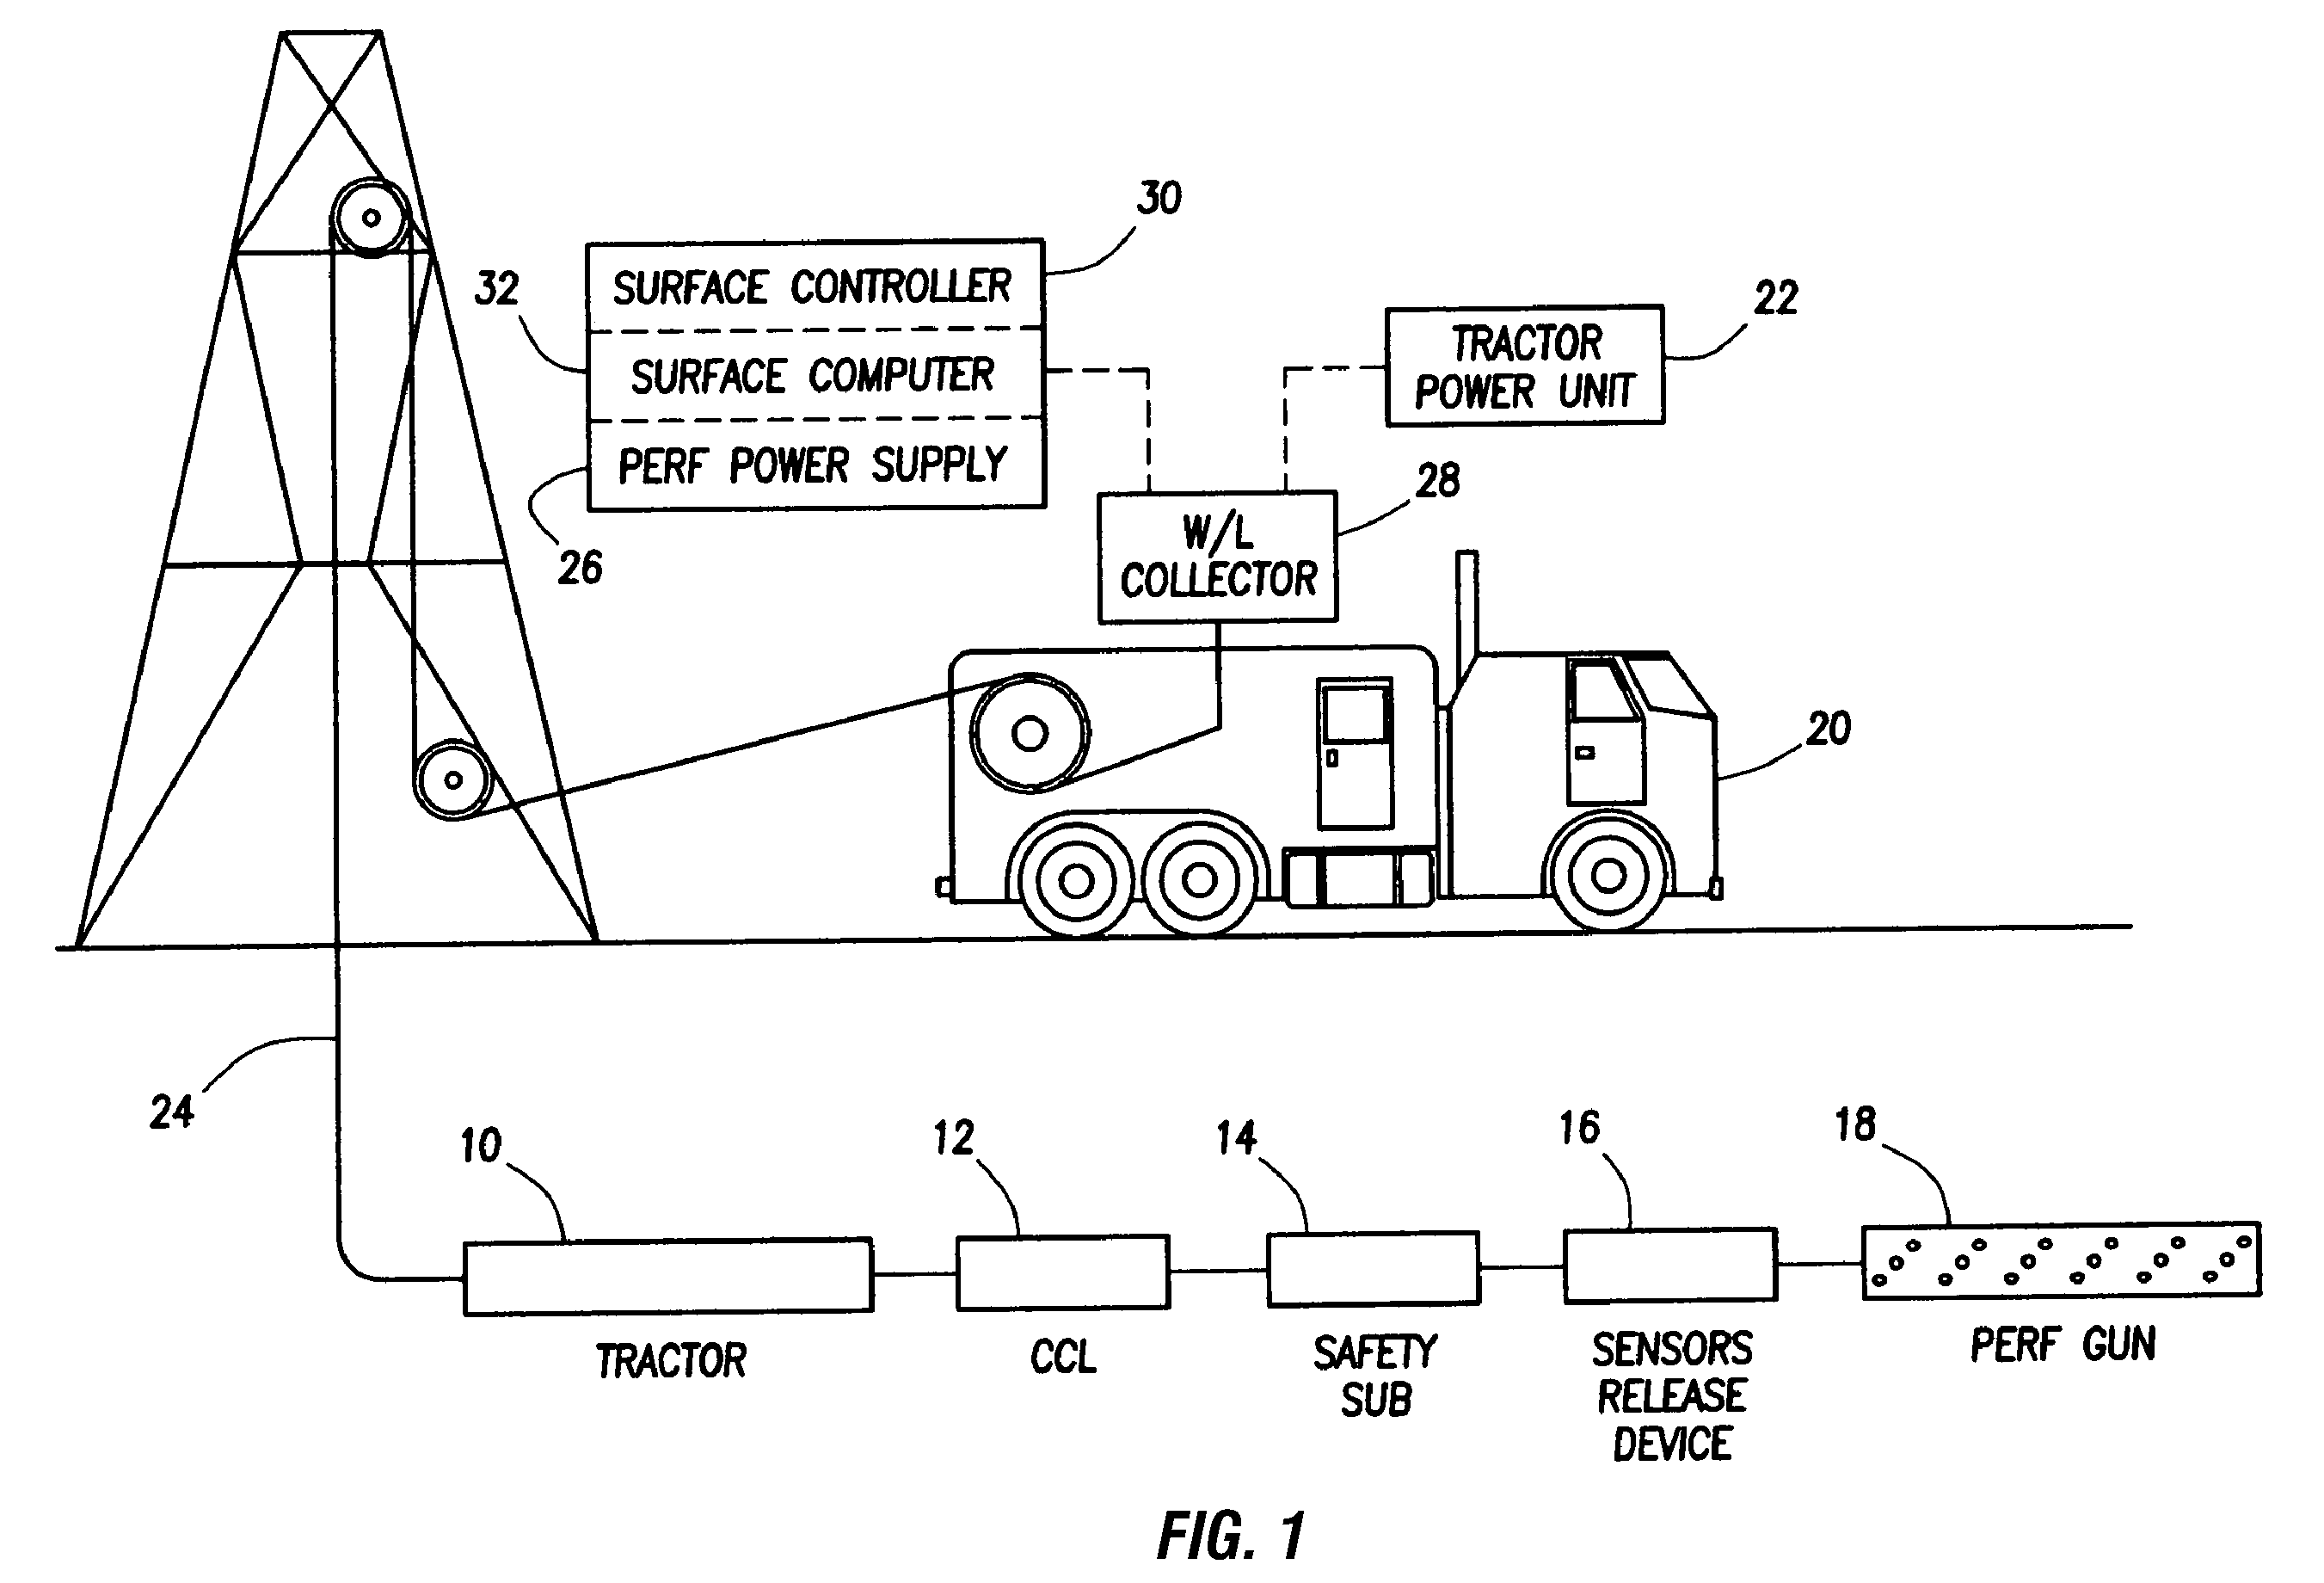 Apparatus and methods for controlling and communicating with downwhole devices